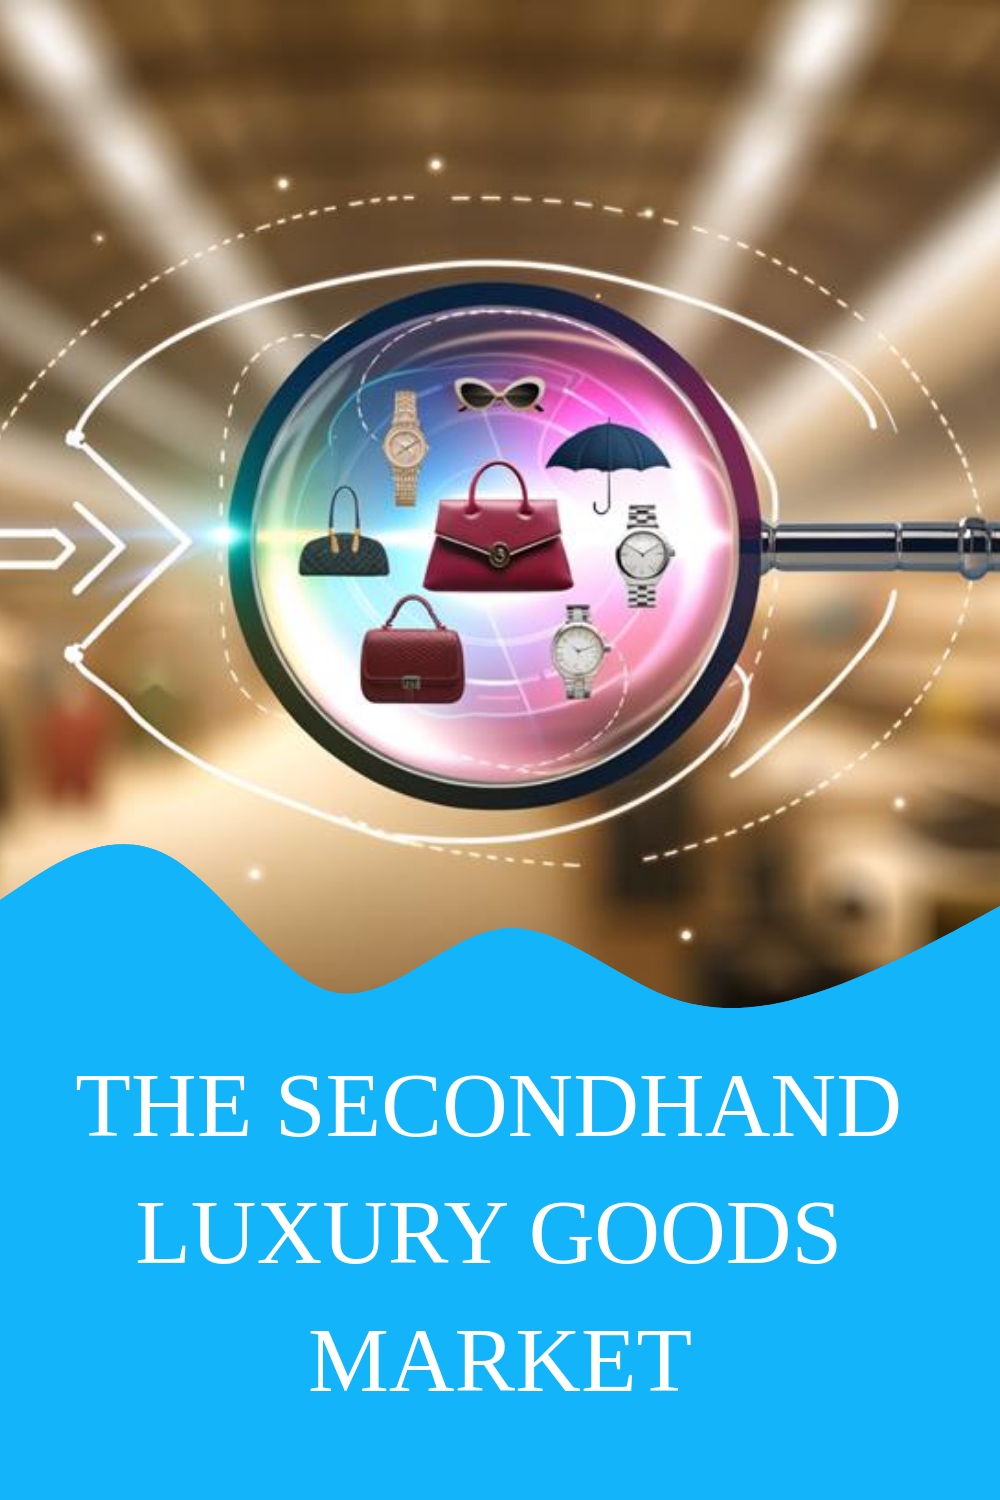 The Secondhand Luxury Goods Market Generated Pin 1016 1